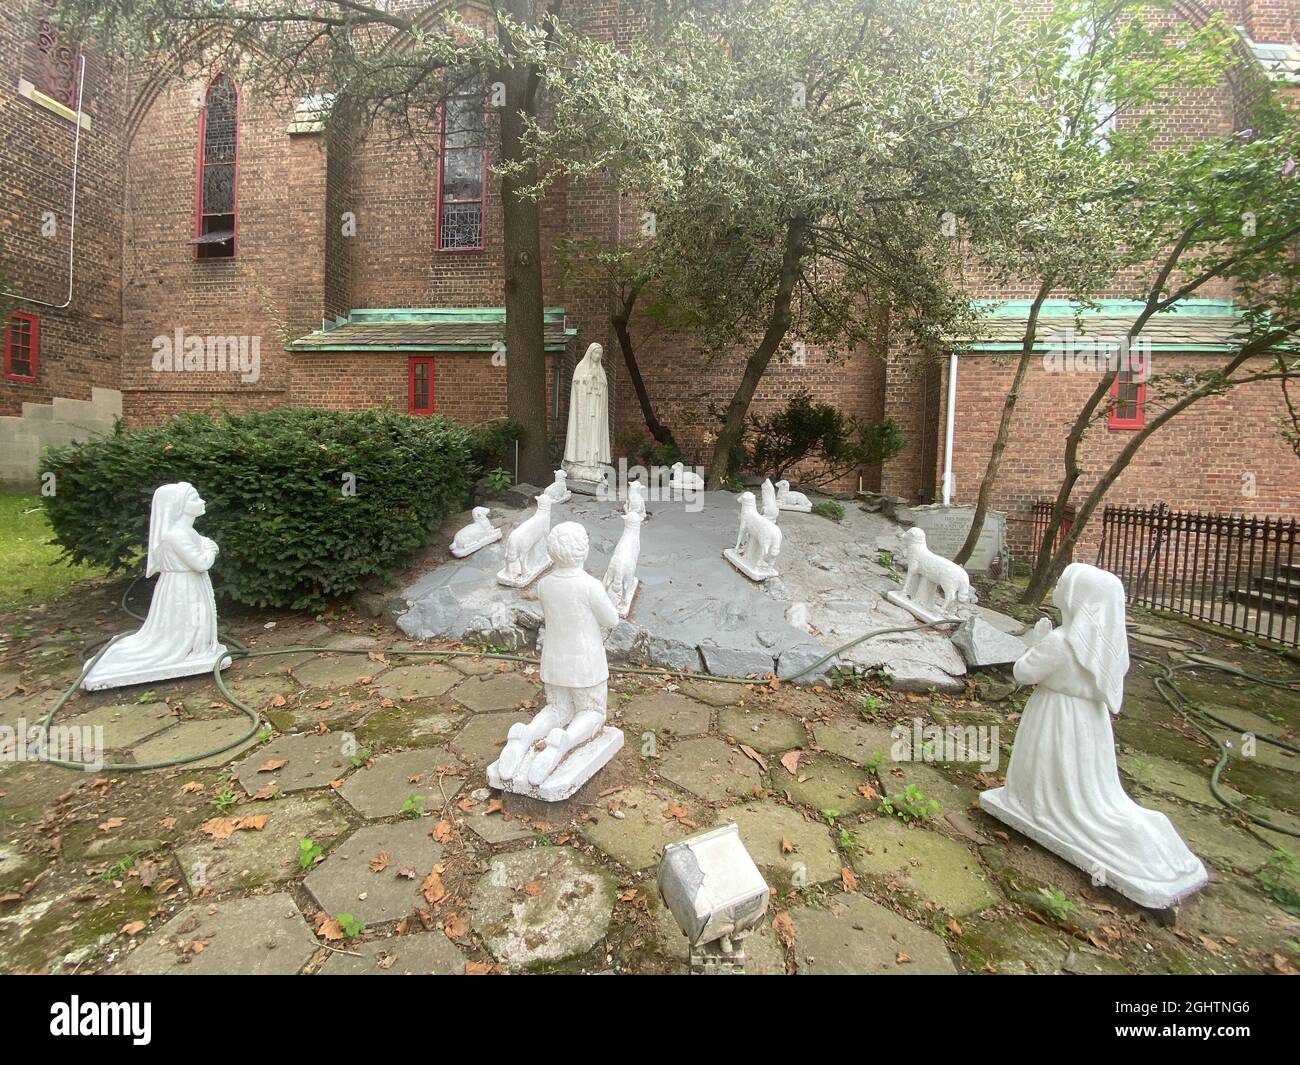 Shrine to "Our Lady of Fatima Apparition" the 1917 sighting by 3 children in Portugal of the Virgin Mary who spoke to them every week for a month as the story goes. Catholic Church, Brooklyn, New York. Stock Photo